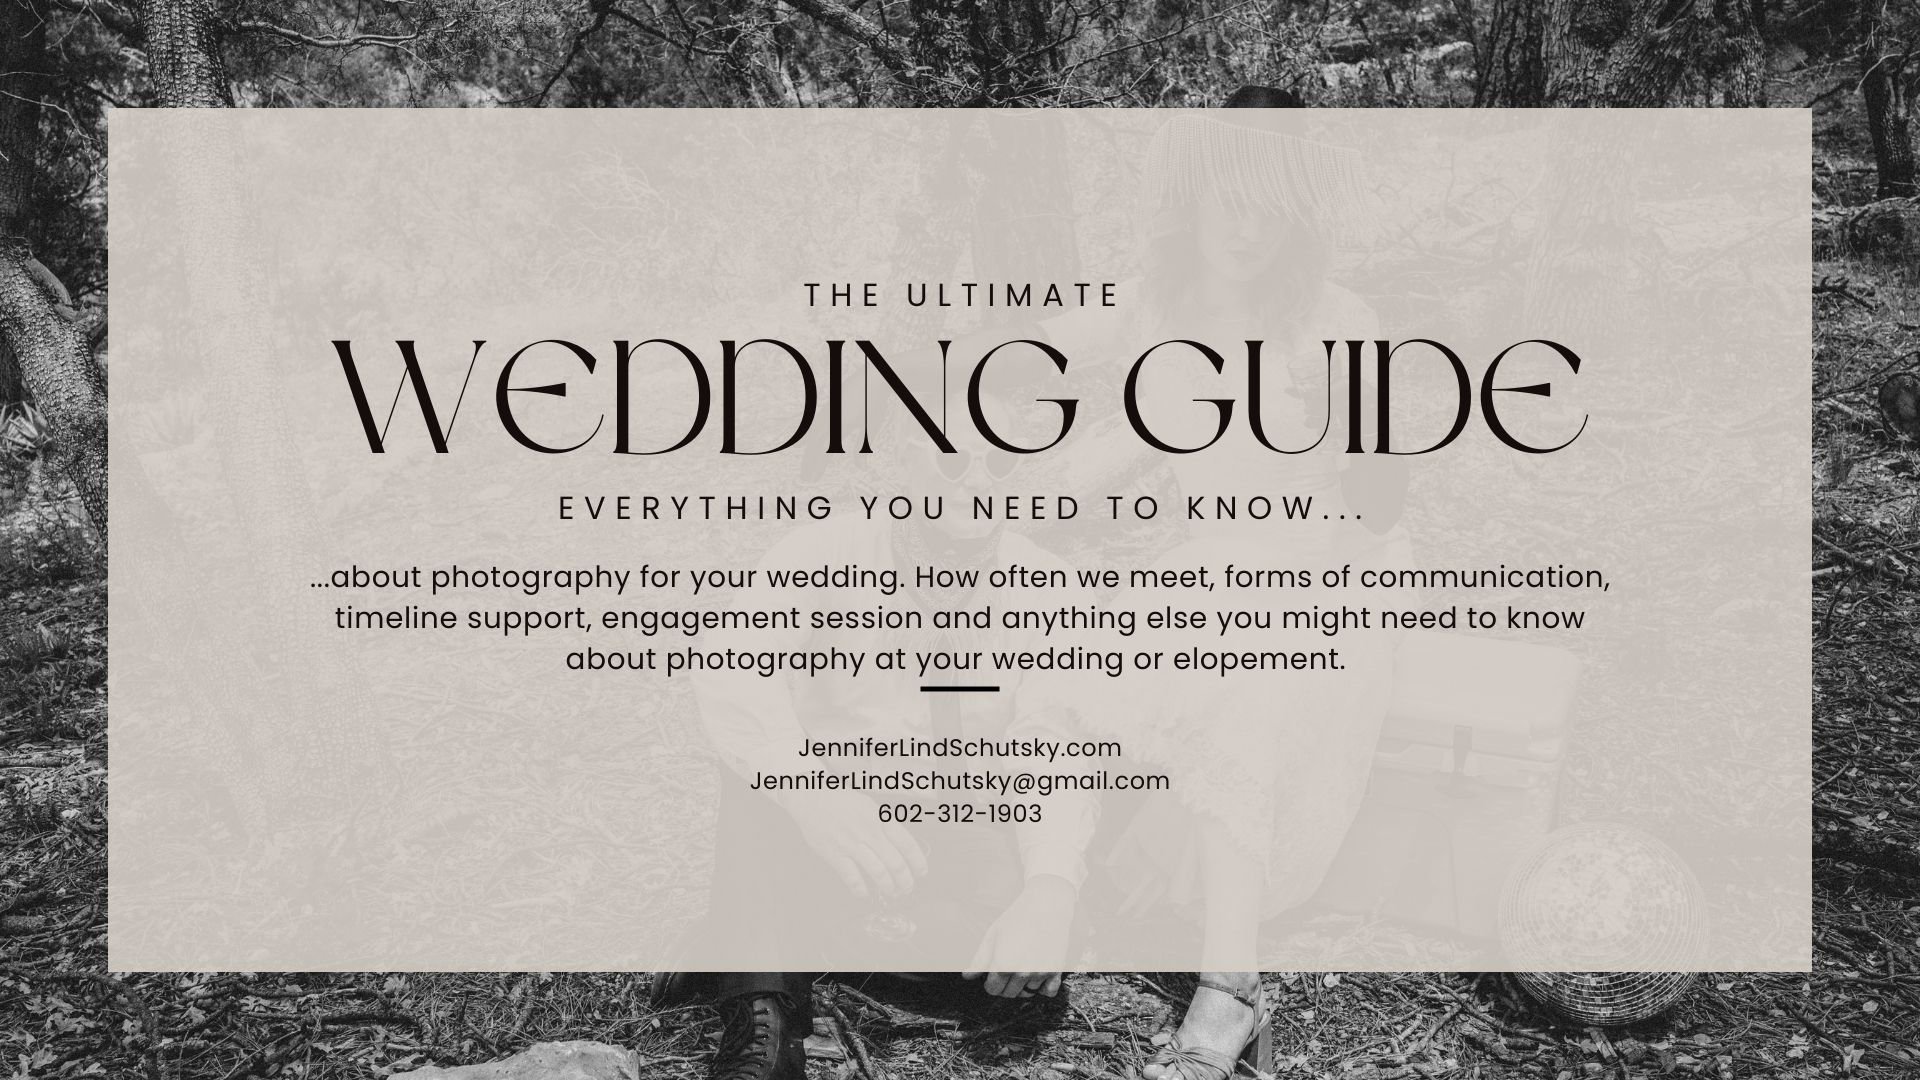 Wedding Guide for what to expect for wedding photography with destination wedding photographer; Jennifer Lind Schutsky 